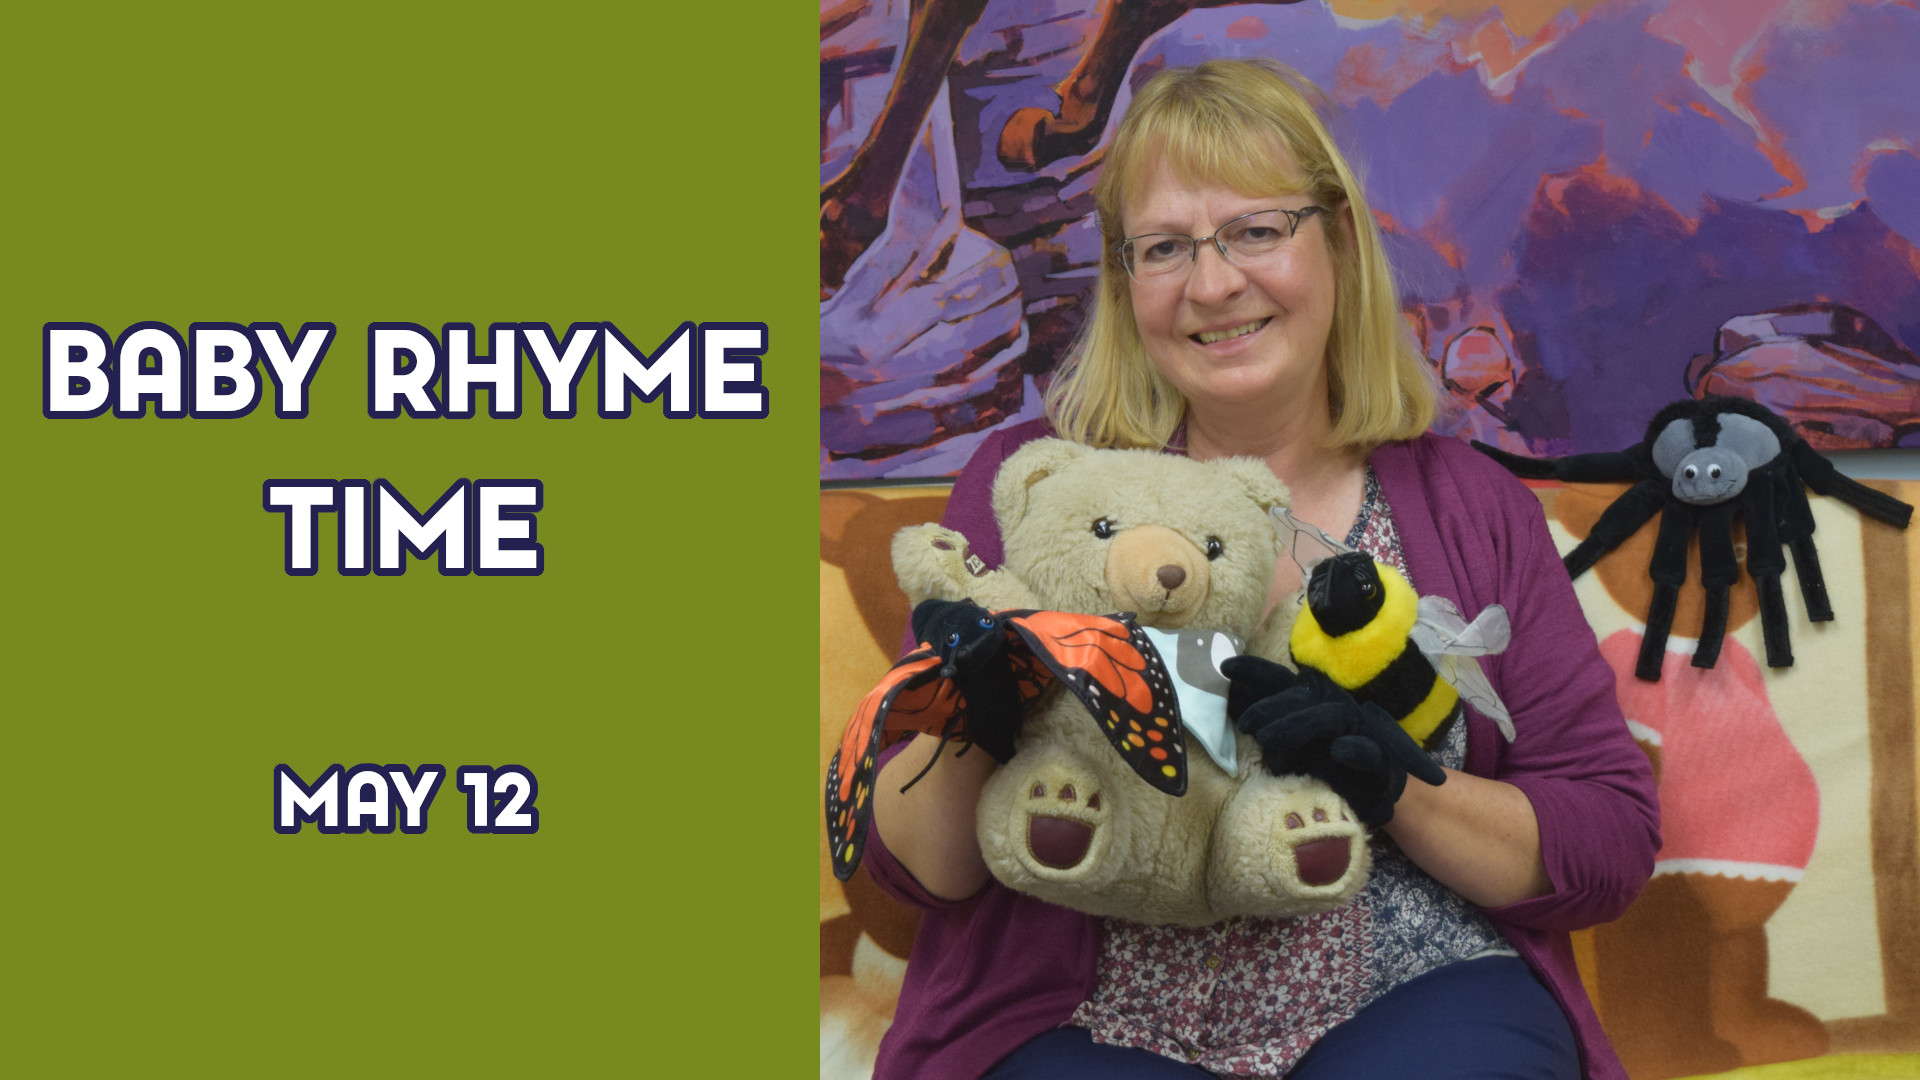 A woman holds stuffed animals next to the text "Baby Rhyme Time May 12"